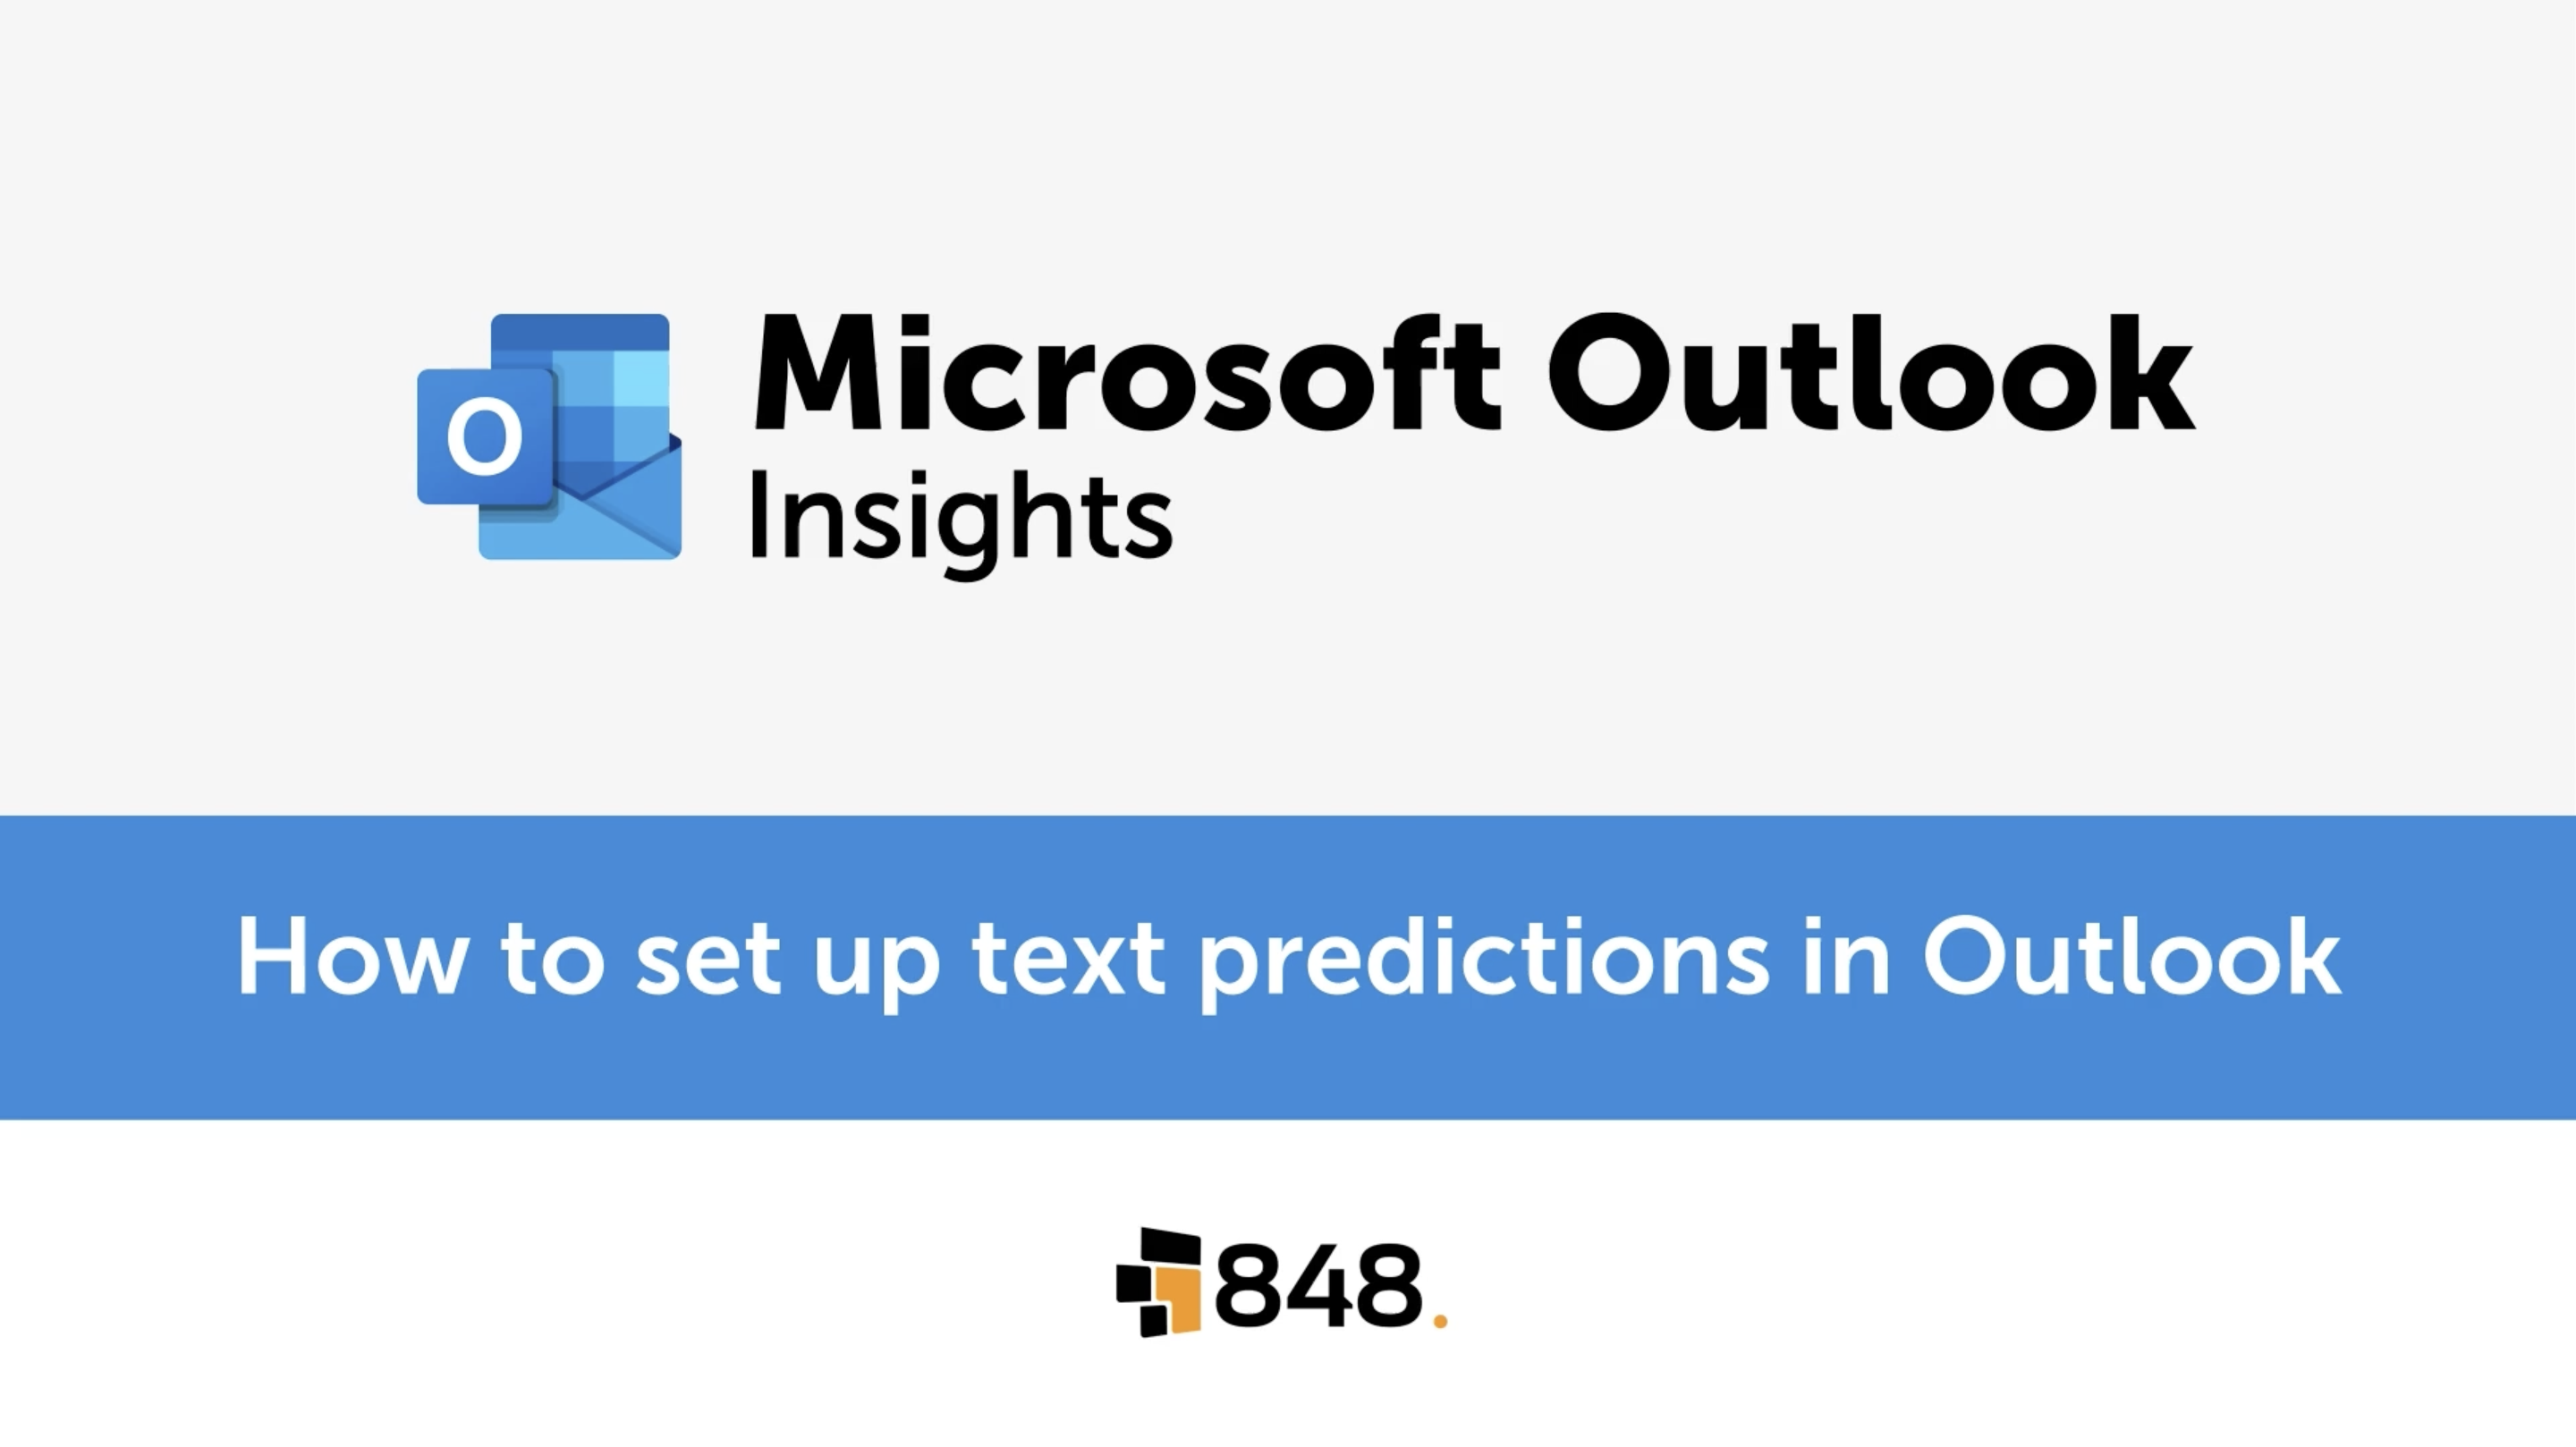 text predictions in Outlook